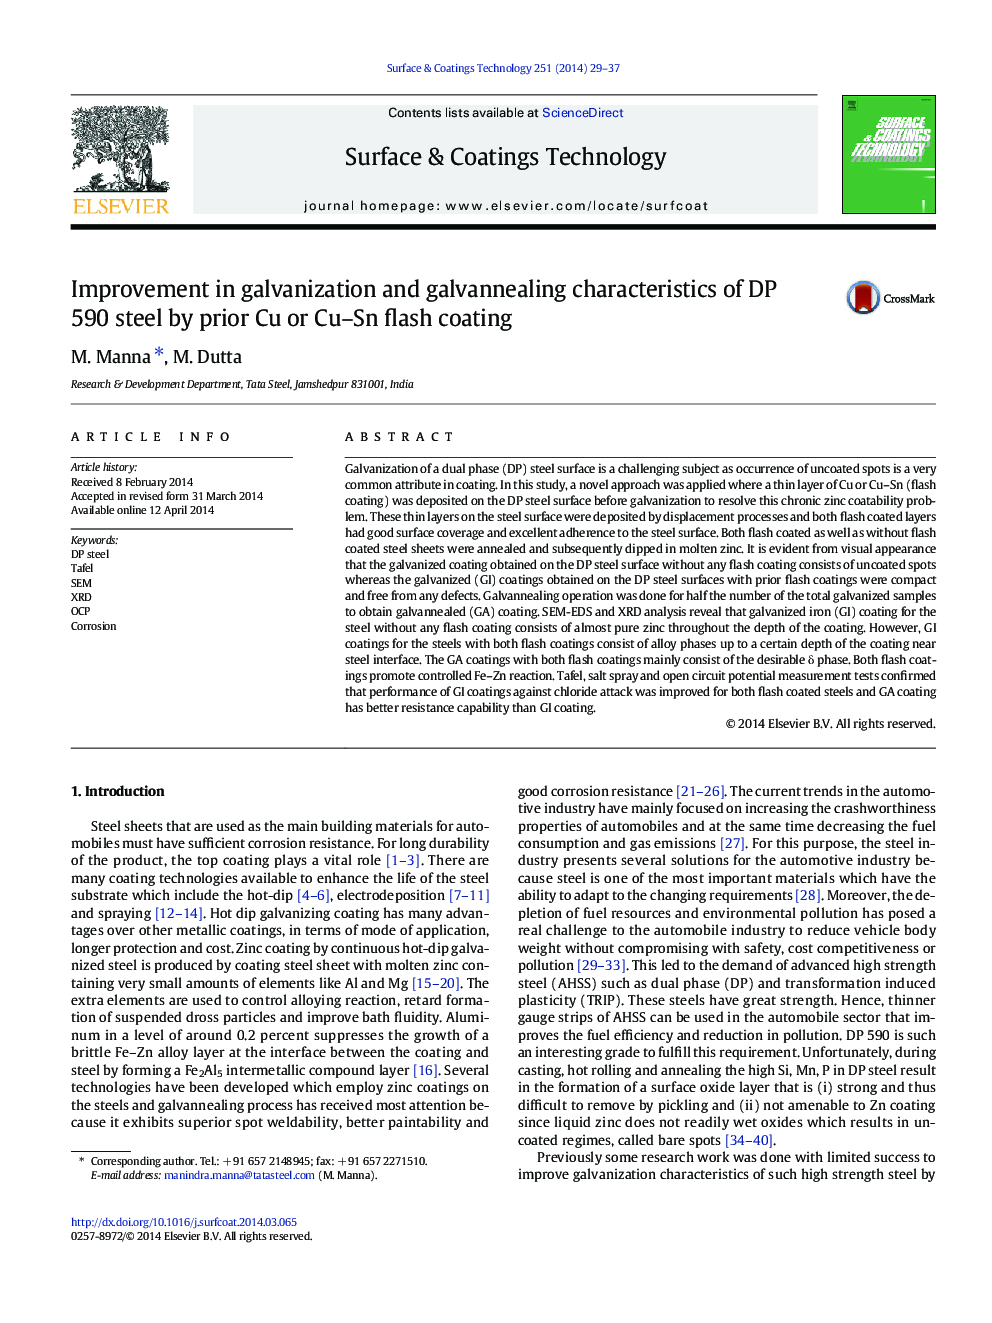 Improvement in galvanization and galvannealing characteristics of DP 590 steel by prior Cu or Cu–Sn flash coating